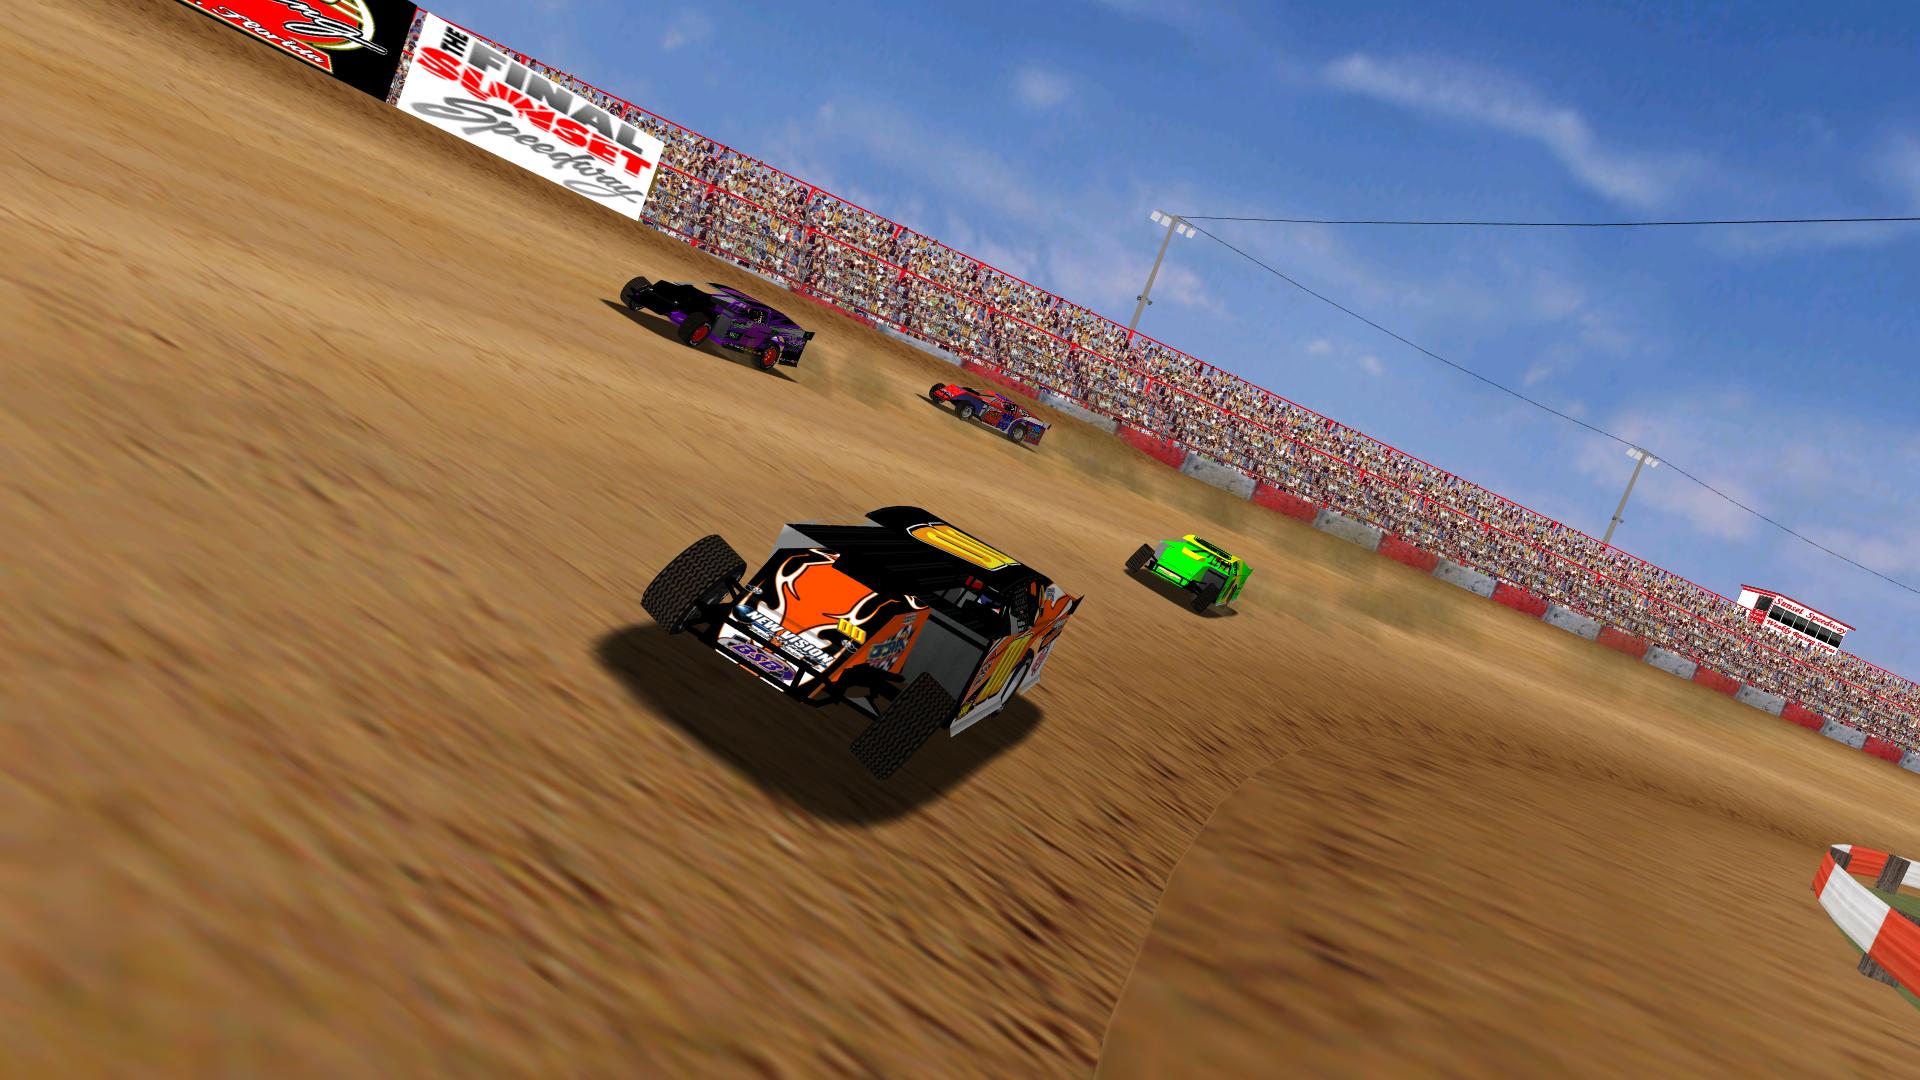 KartRacer63 leads the field into turn one on the first lap. (NASCAR Heat Modified Association)